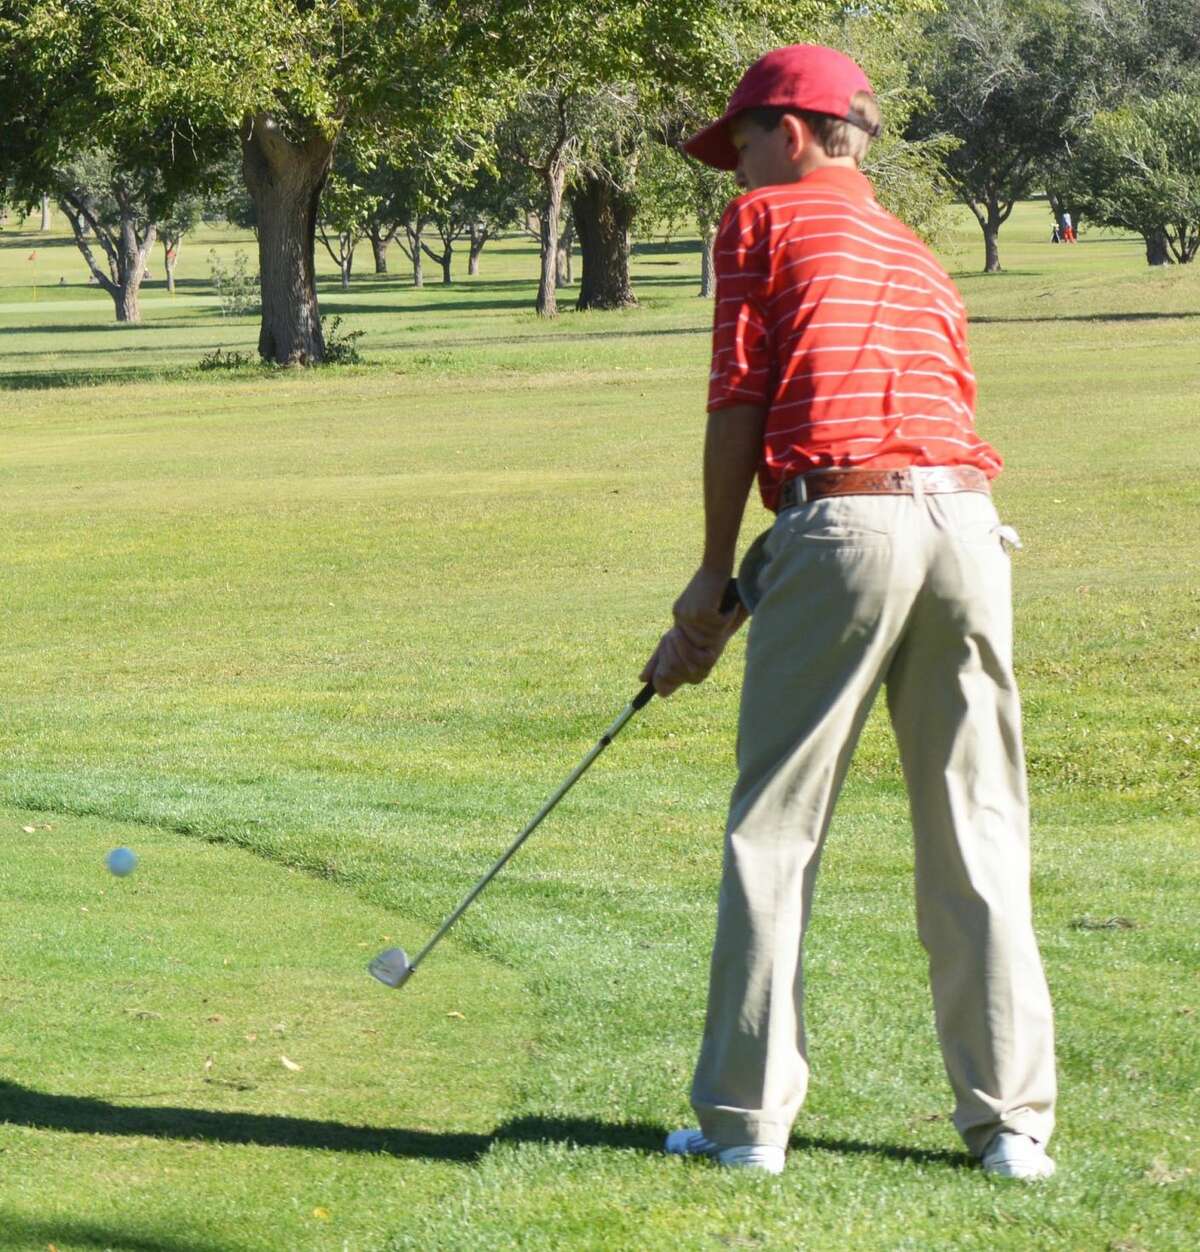 Plainview's Hagen Offield chips the ball onto the green during the Plainview Triangular at the Plainview Country Club Saturday. Offield shot a 99 to help the 'B' team to a second-place finish in their meet against Hereford and Pampa.